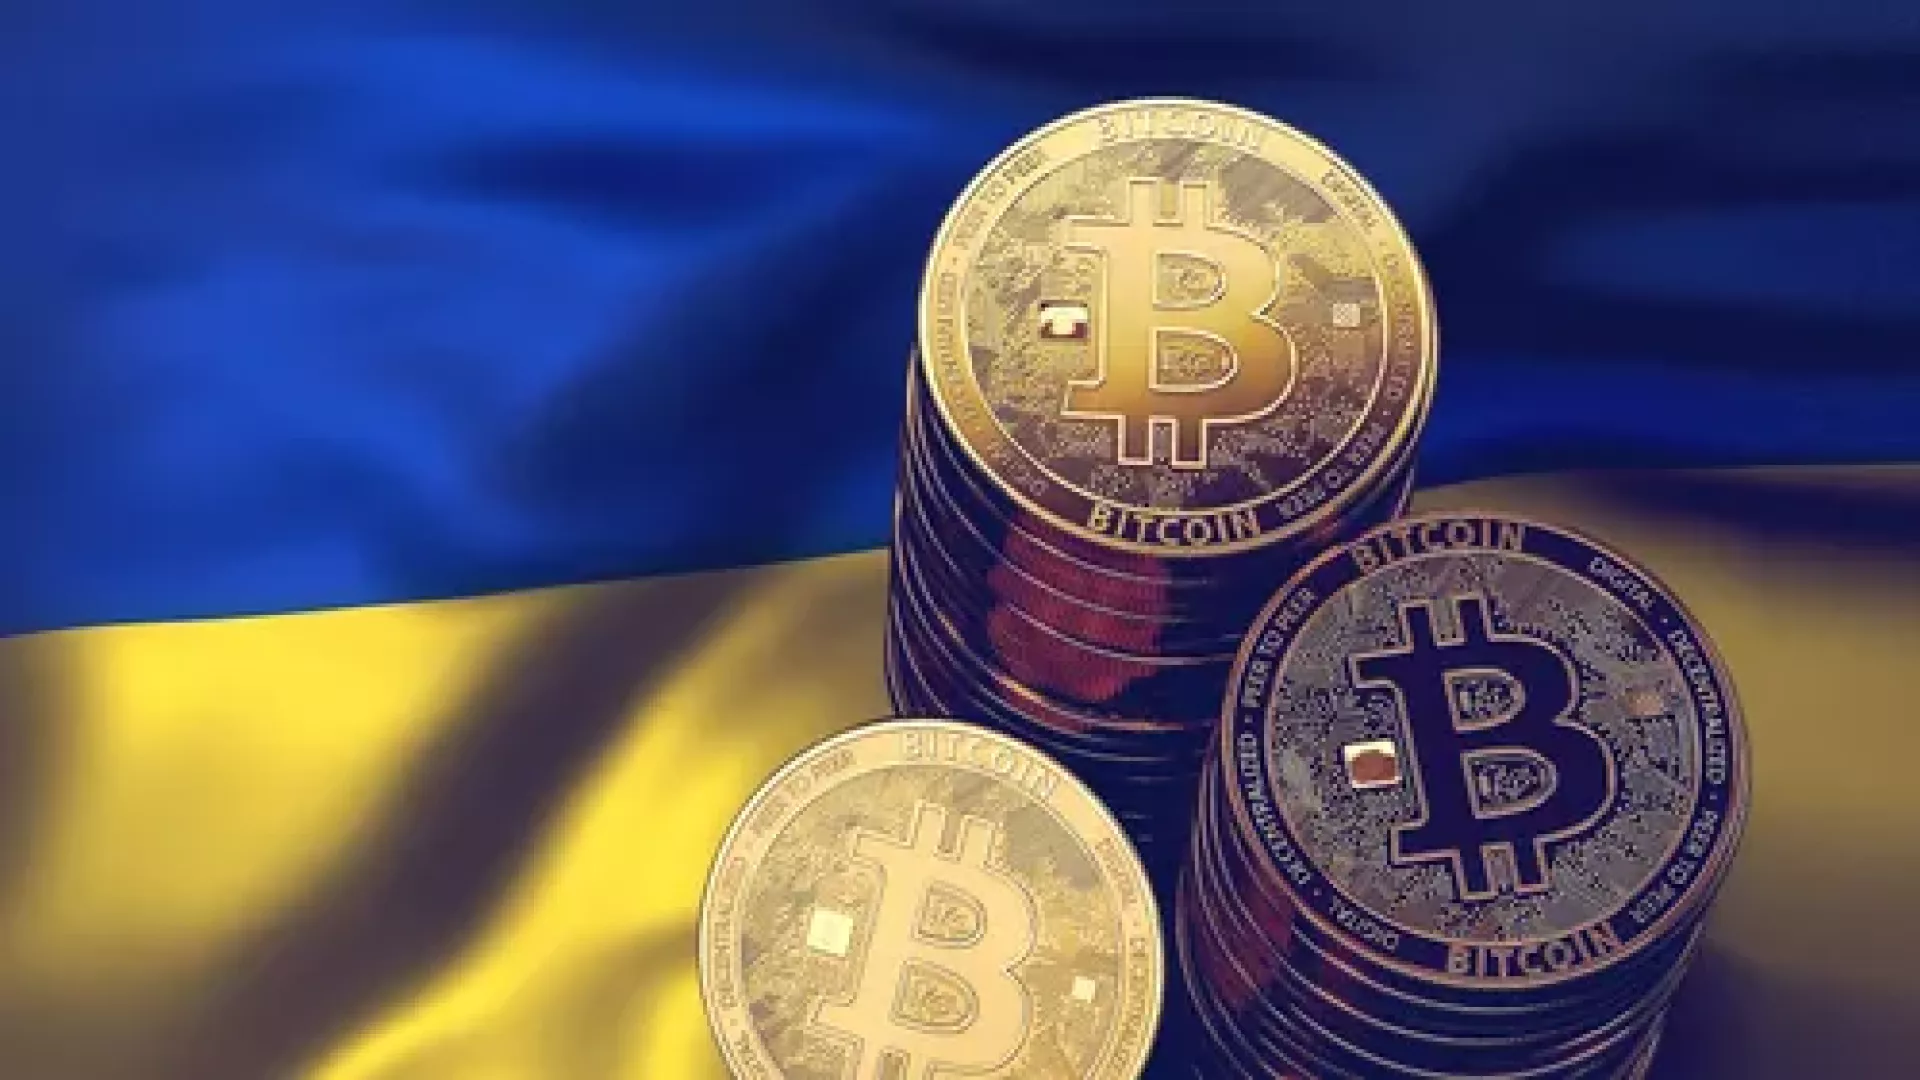 Ukraine has legalized bitcoin and cryptocurrencies and accepts donations in cryptocurrencies